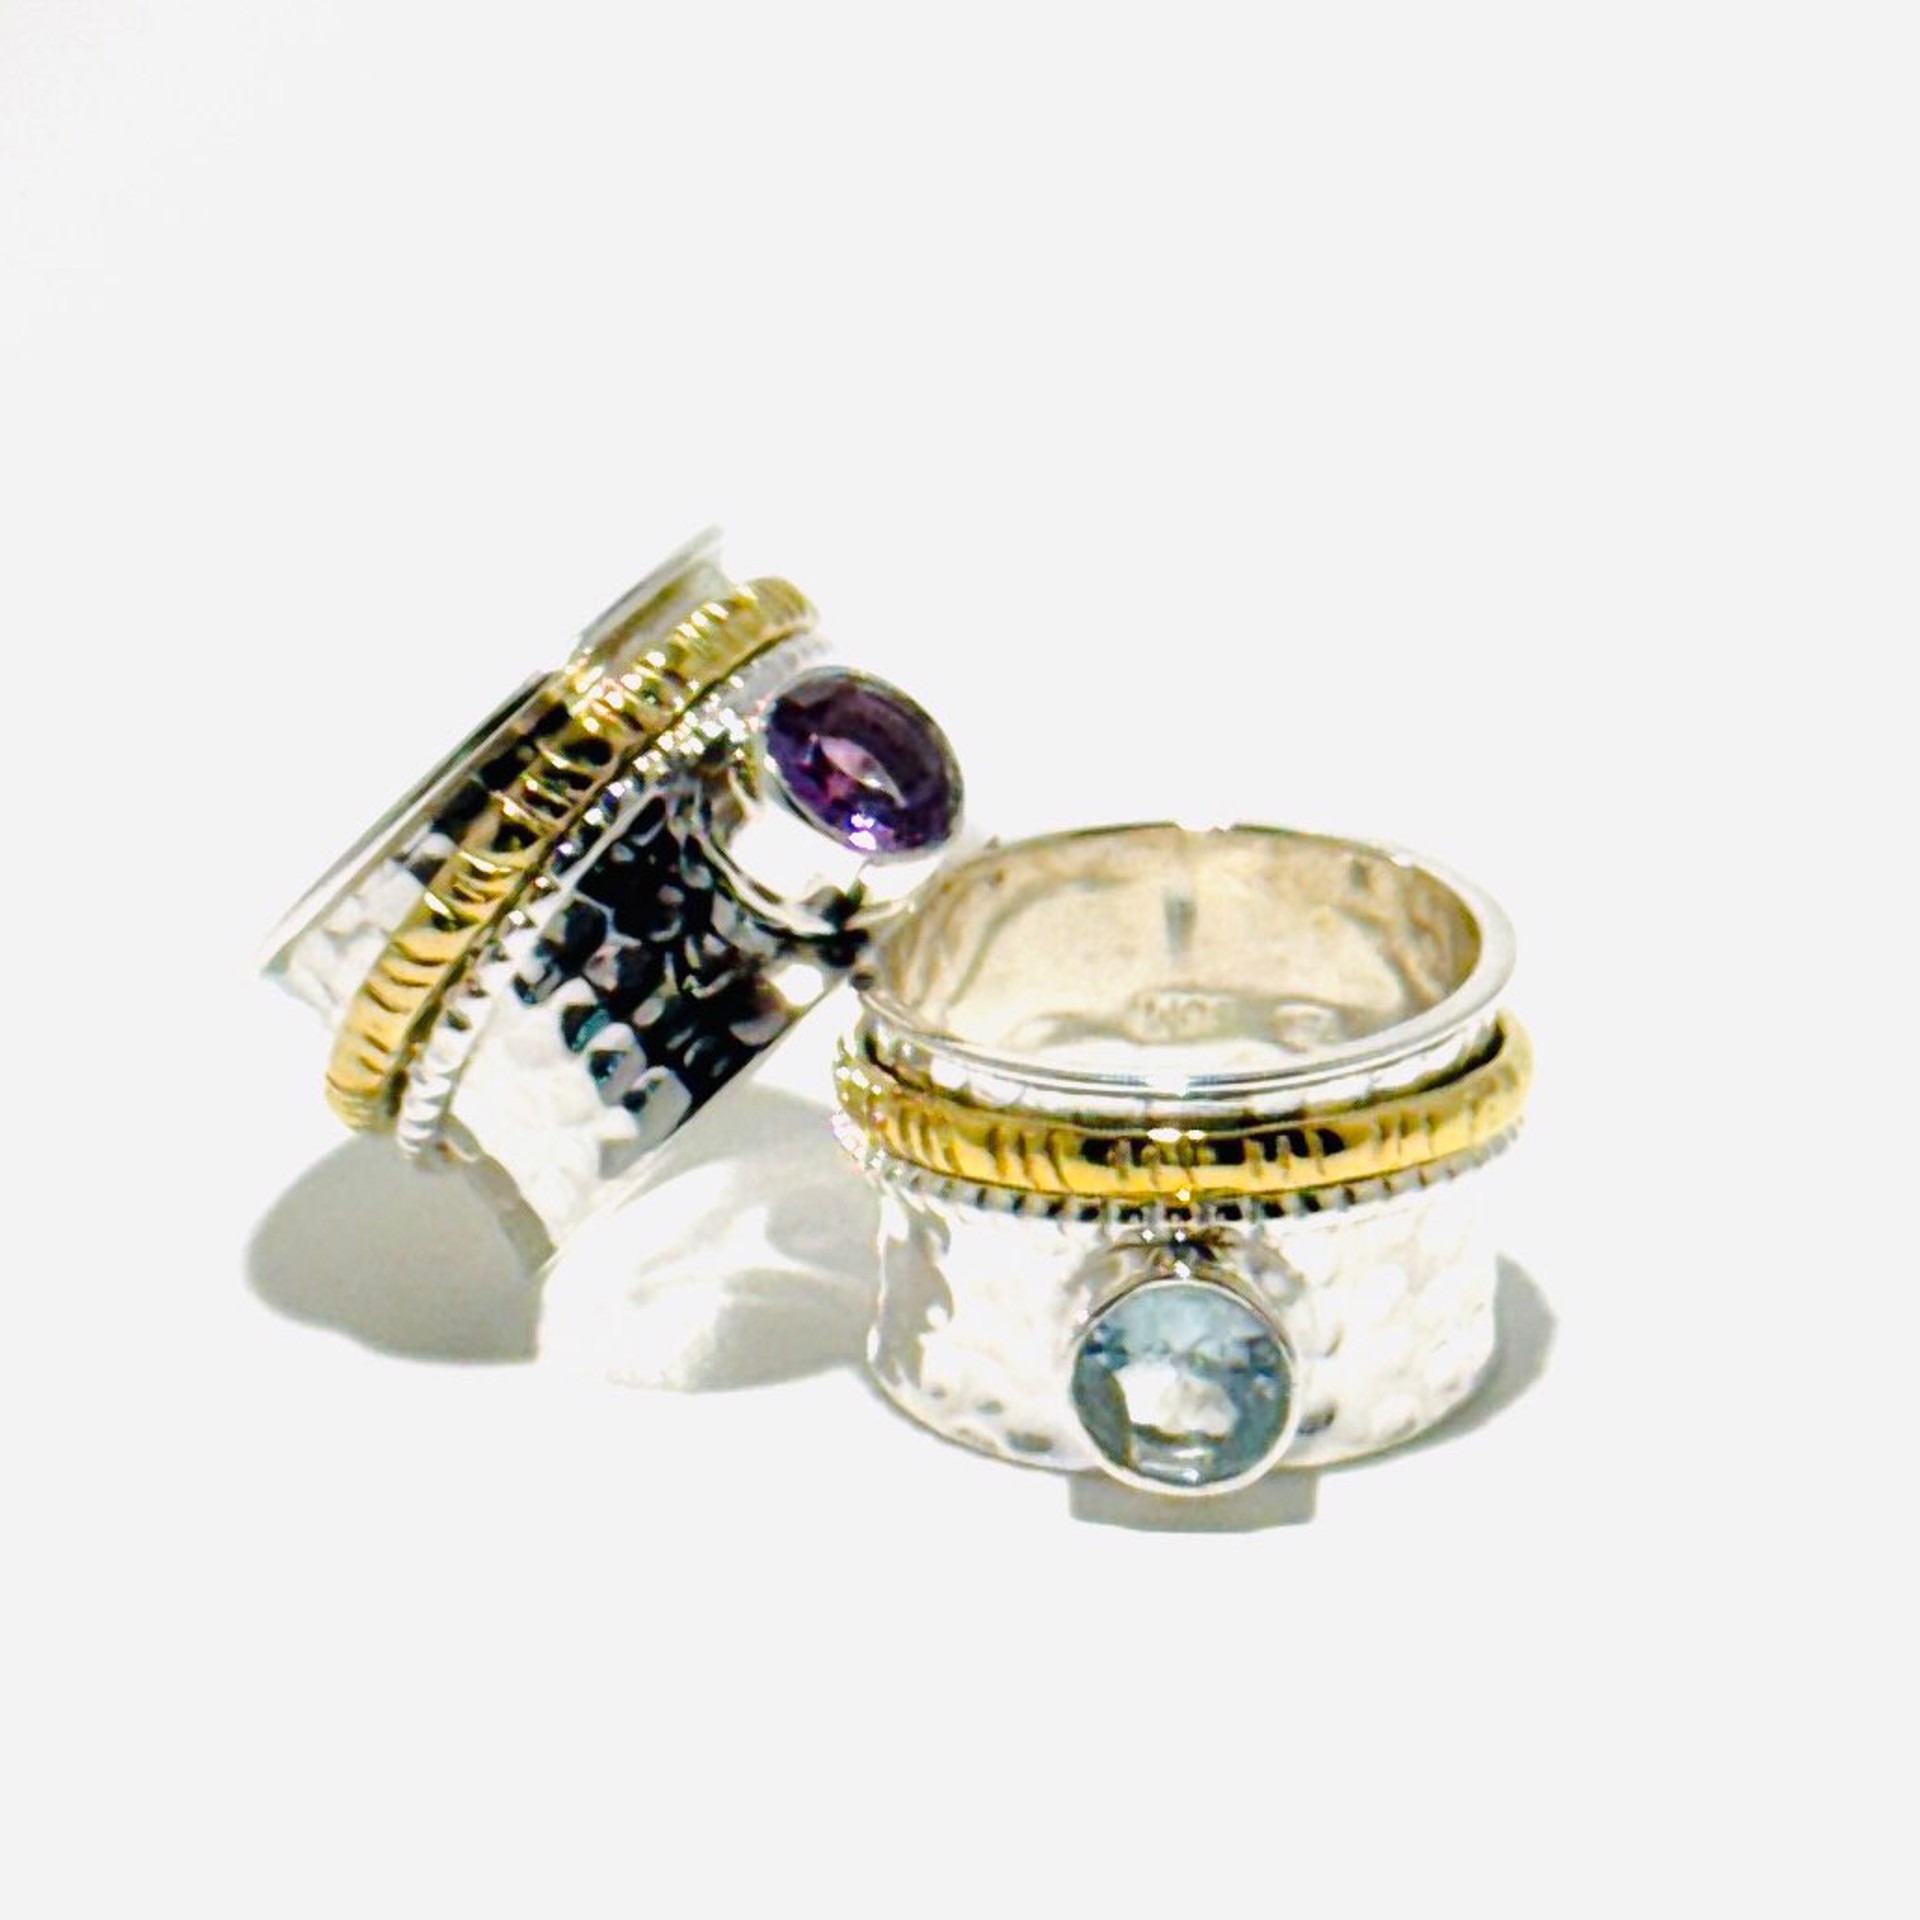 Amethyst, Blue Topaz Spin Ring LIMITED SIZES MONSR-3136 by Monica Mehta